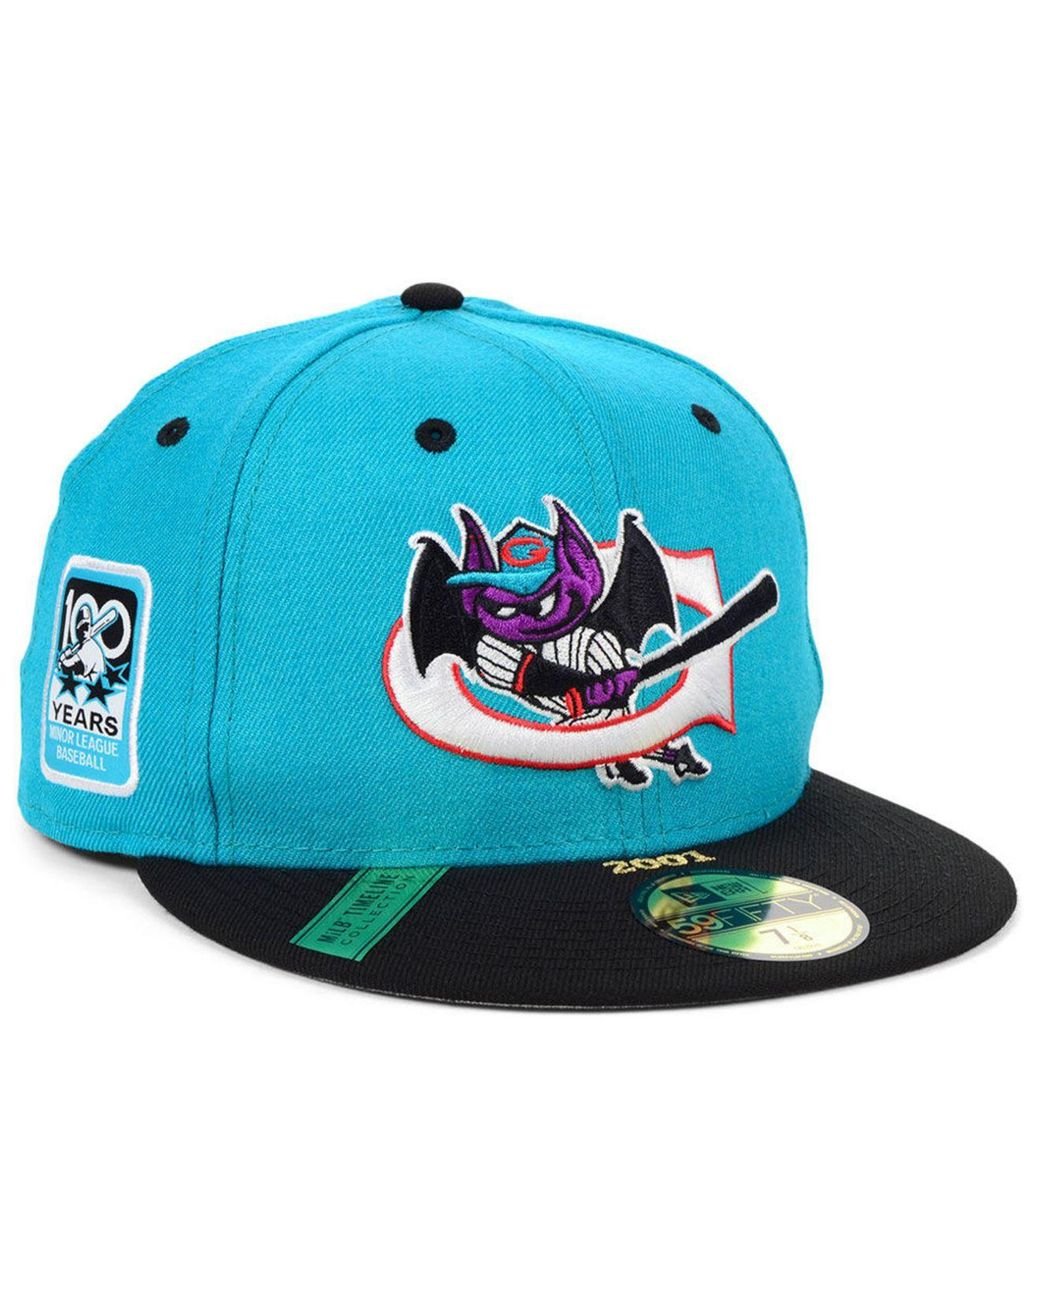 New Era, Accessories, Louisville Bats Minor League Baseball Childsize  Embroidered Ball Cap With Hearts